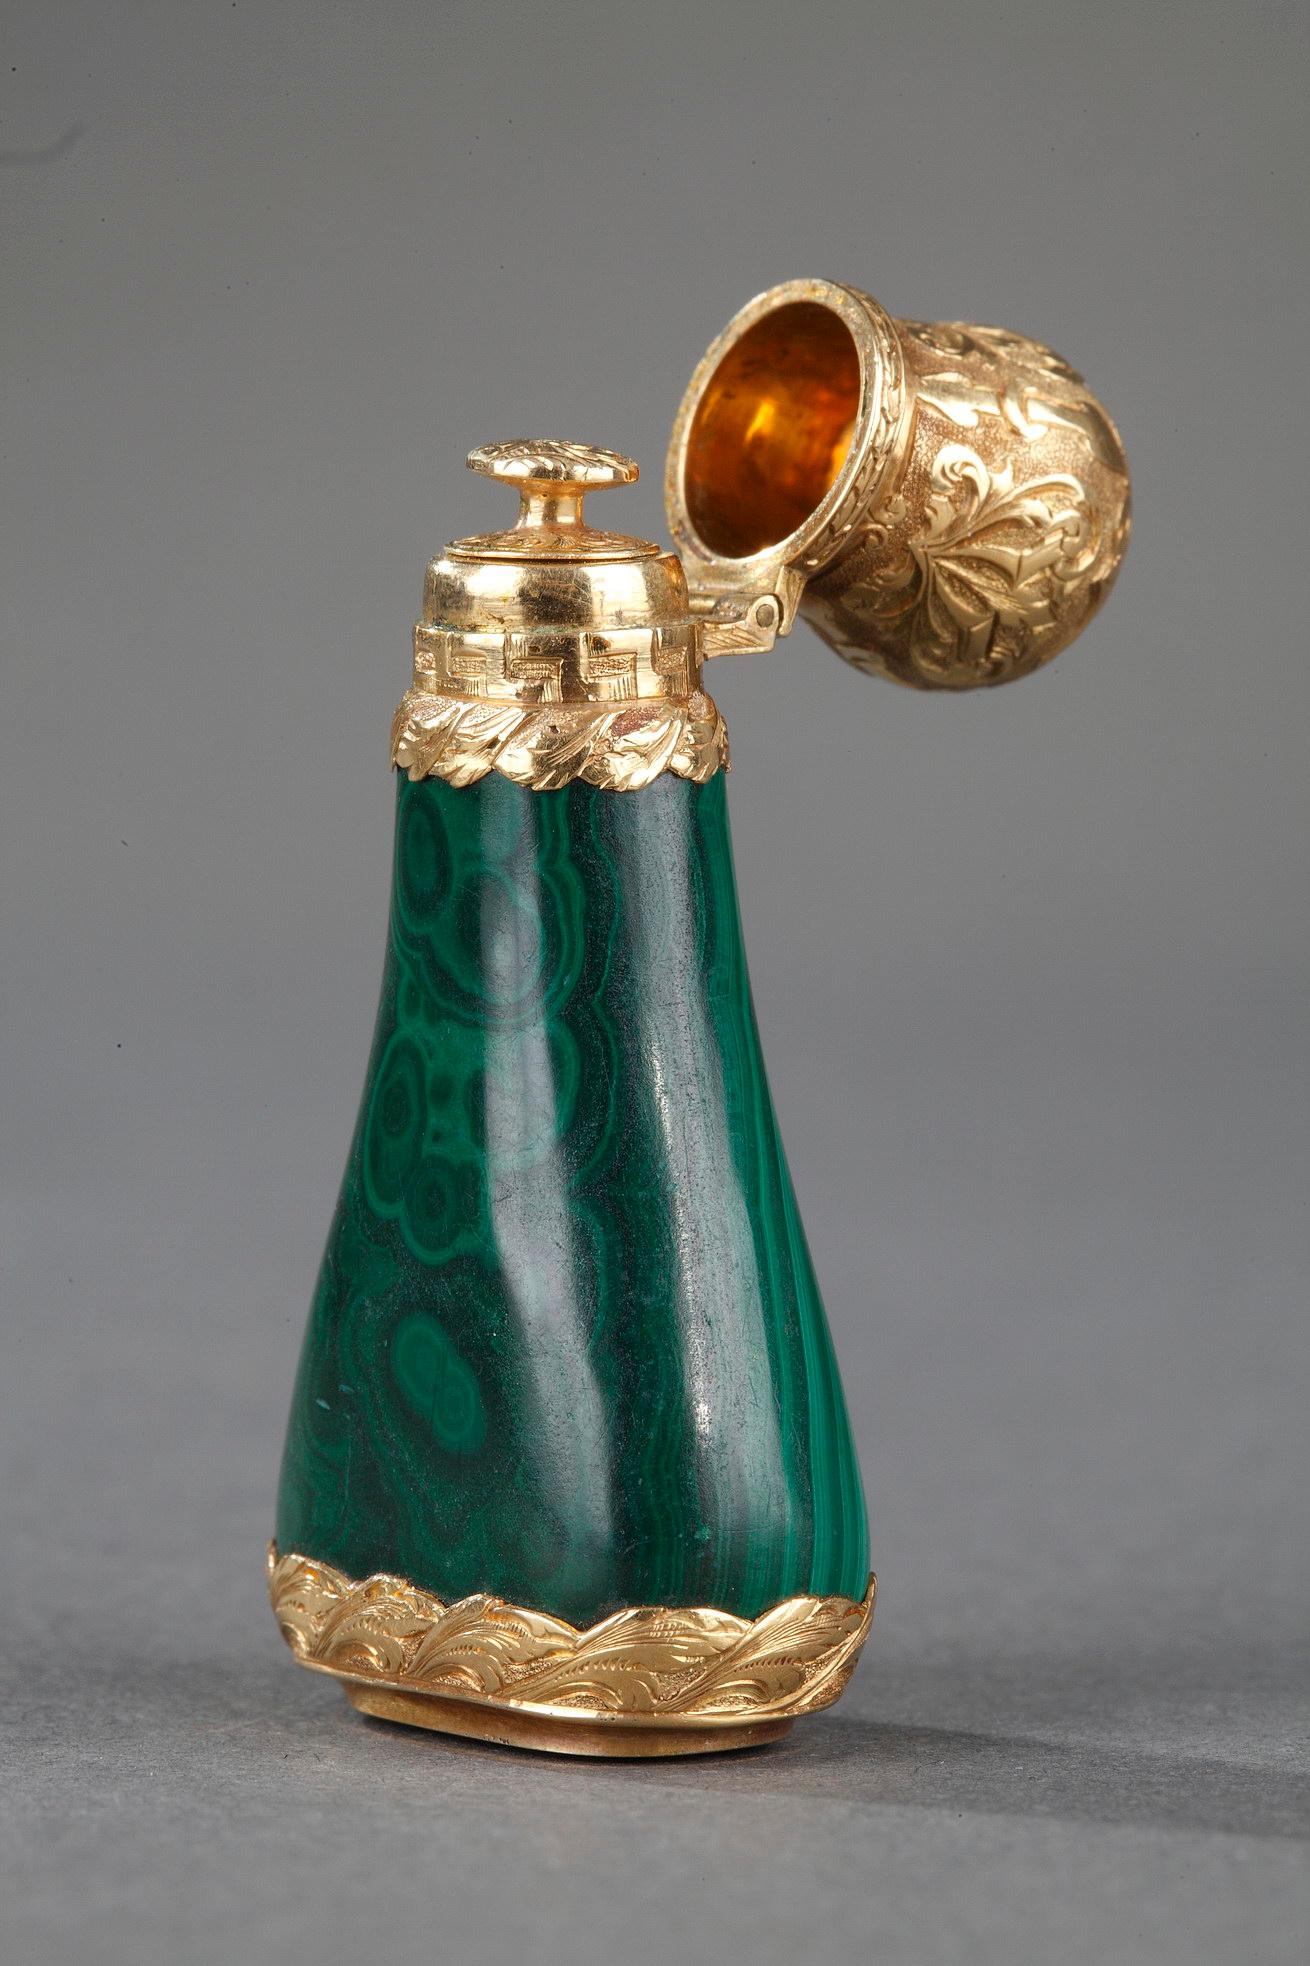 Gold Mounted Malachite Perfume Flask, Mid-19th For Sale 1